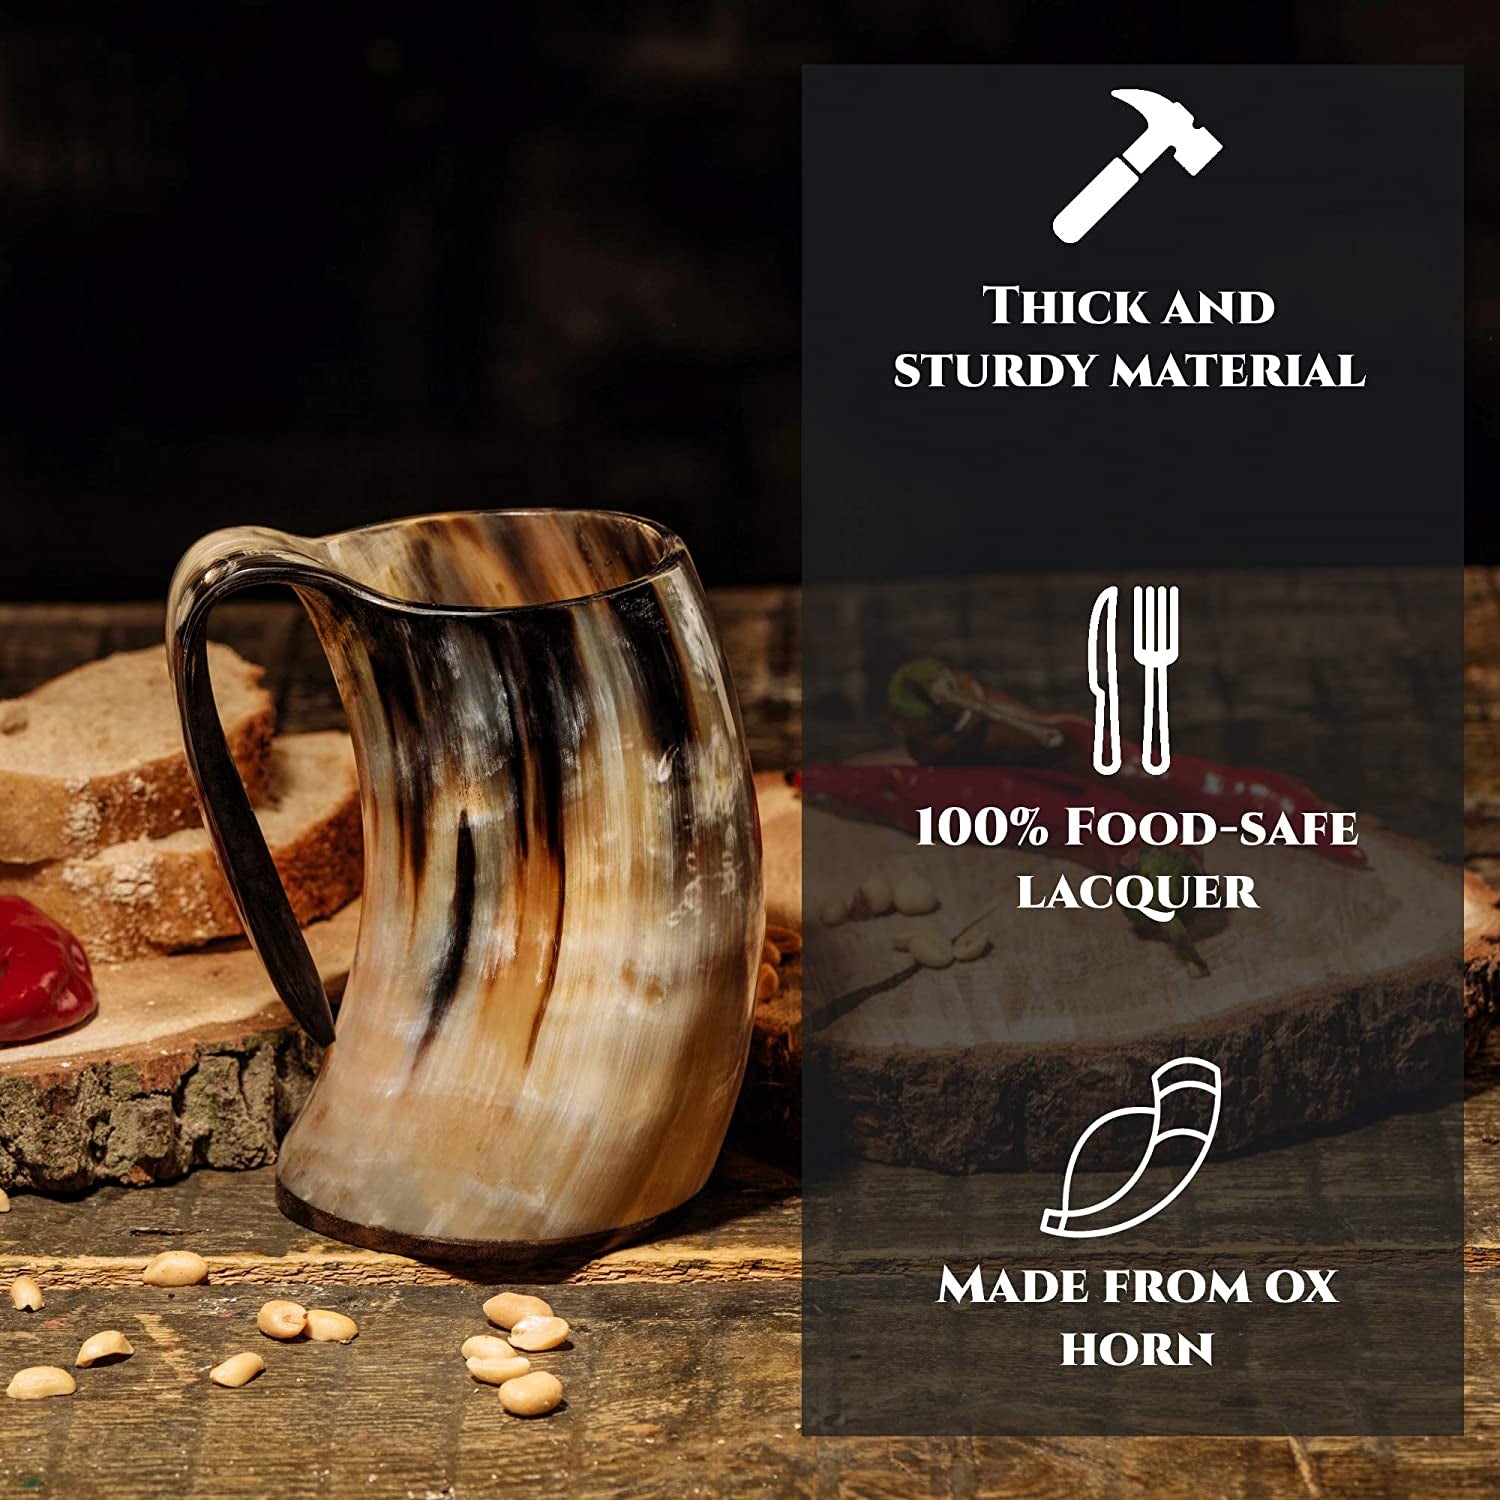 Viking Drinking Horn Mug, 15-20 Oz Natural Ox Horn Cup & Cofee Stein | Cool Unique Beer Gift for Men and Women, Home Decor Accessories | Medieval Shot Glasses for Ale, Mead, Whiskey, Alcohol